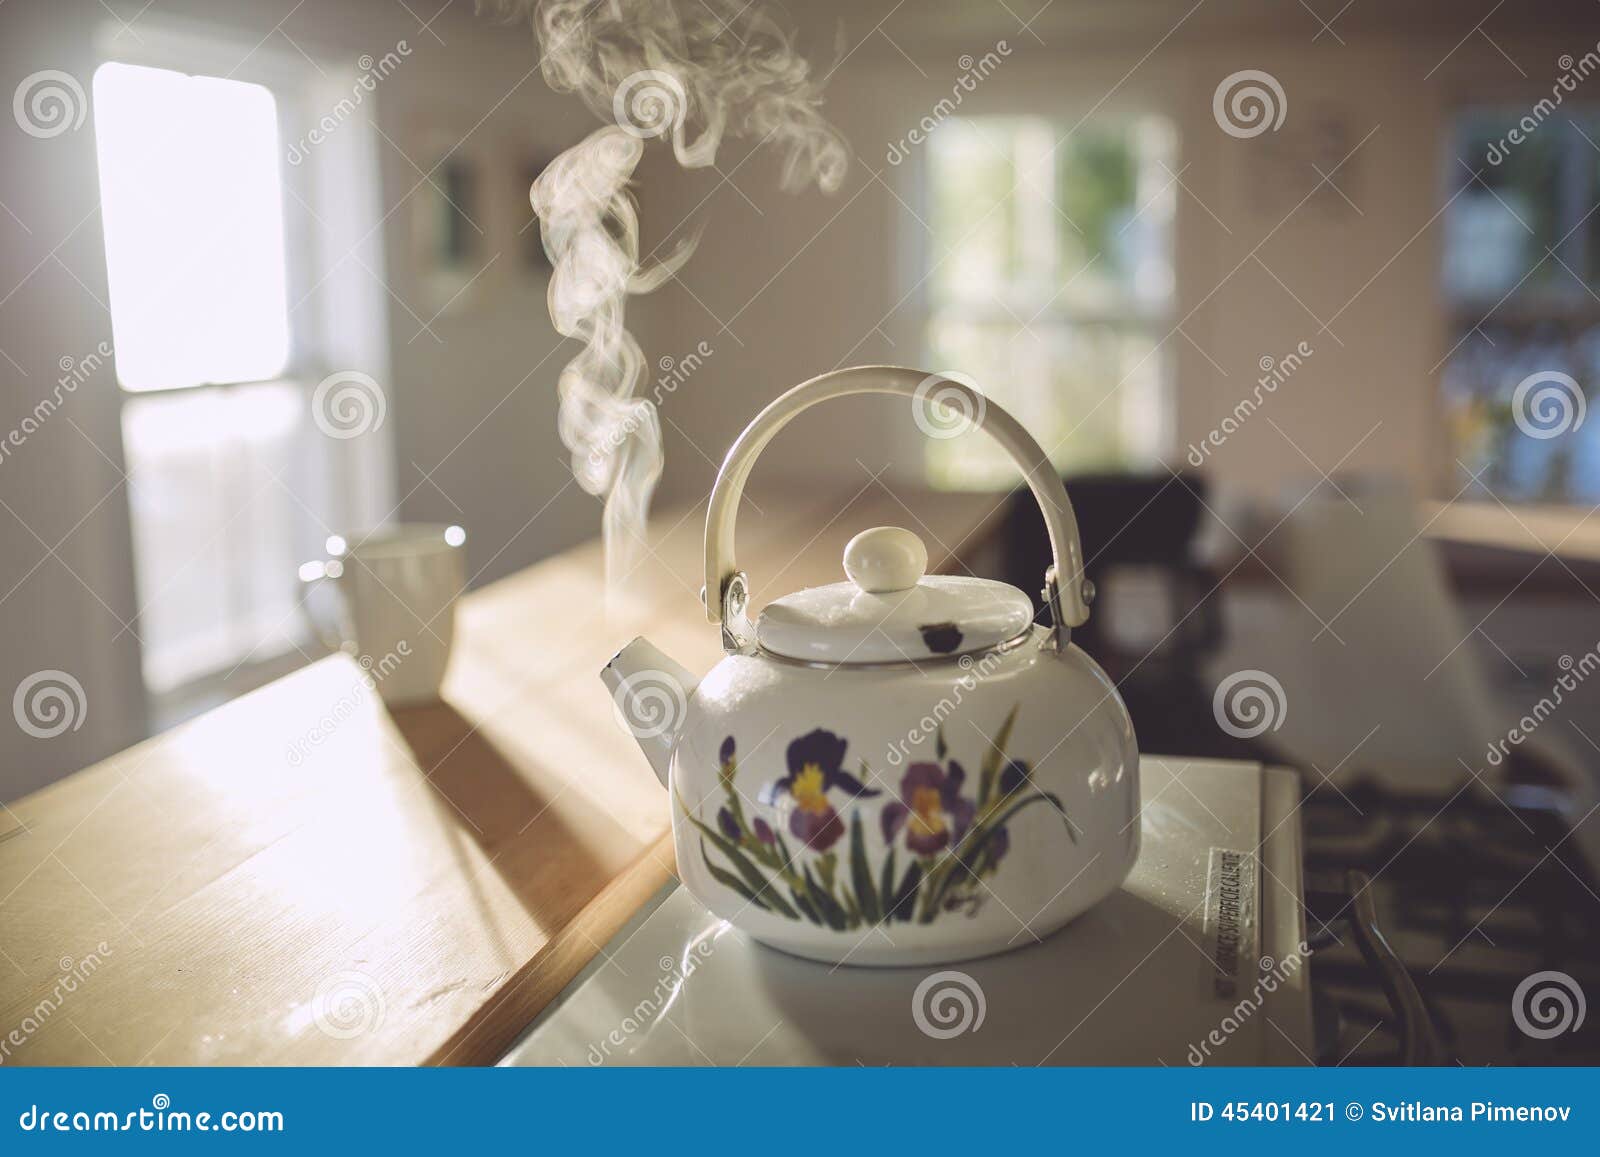 Steaming kettle stock image. Image of kettle, interior - 45401421